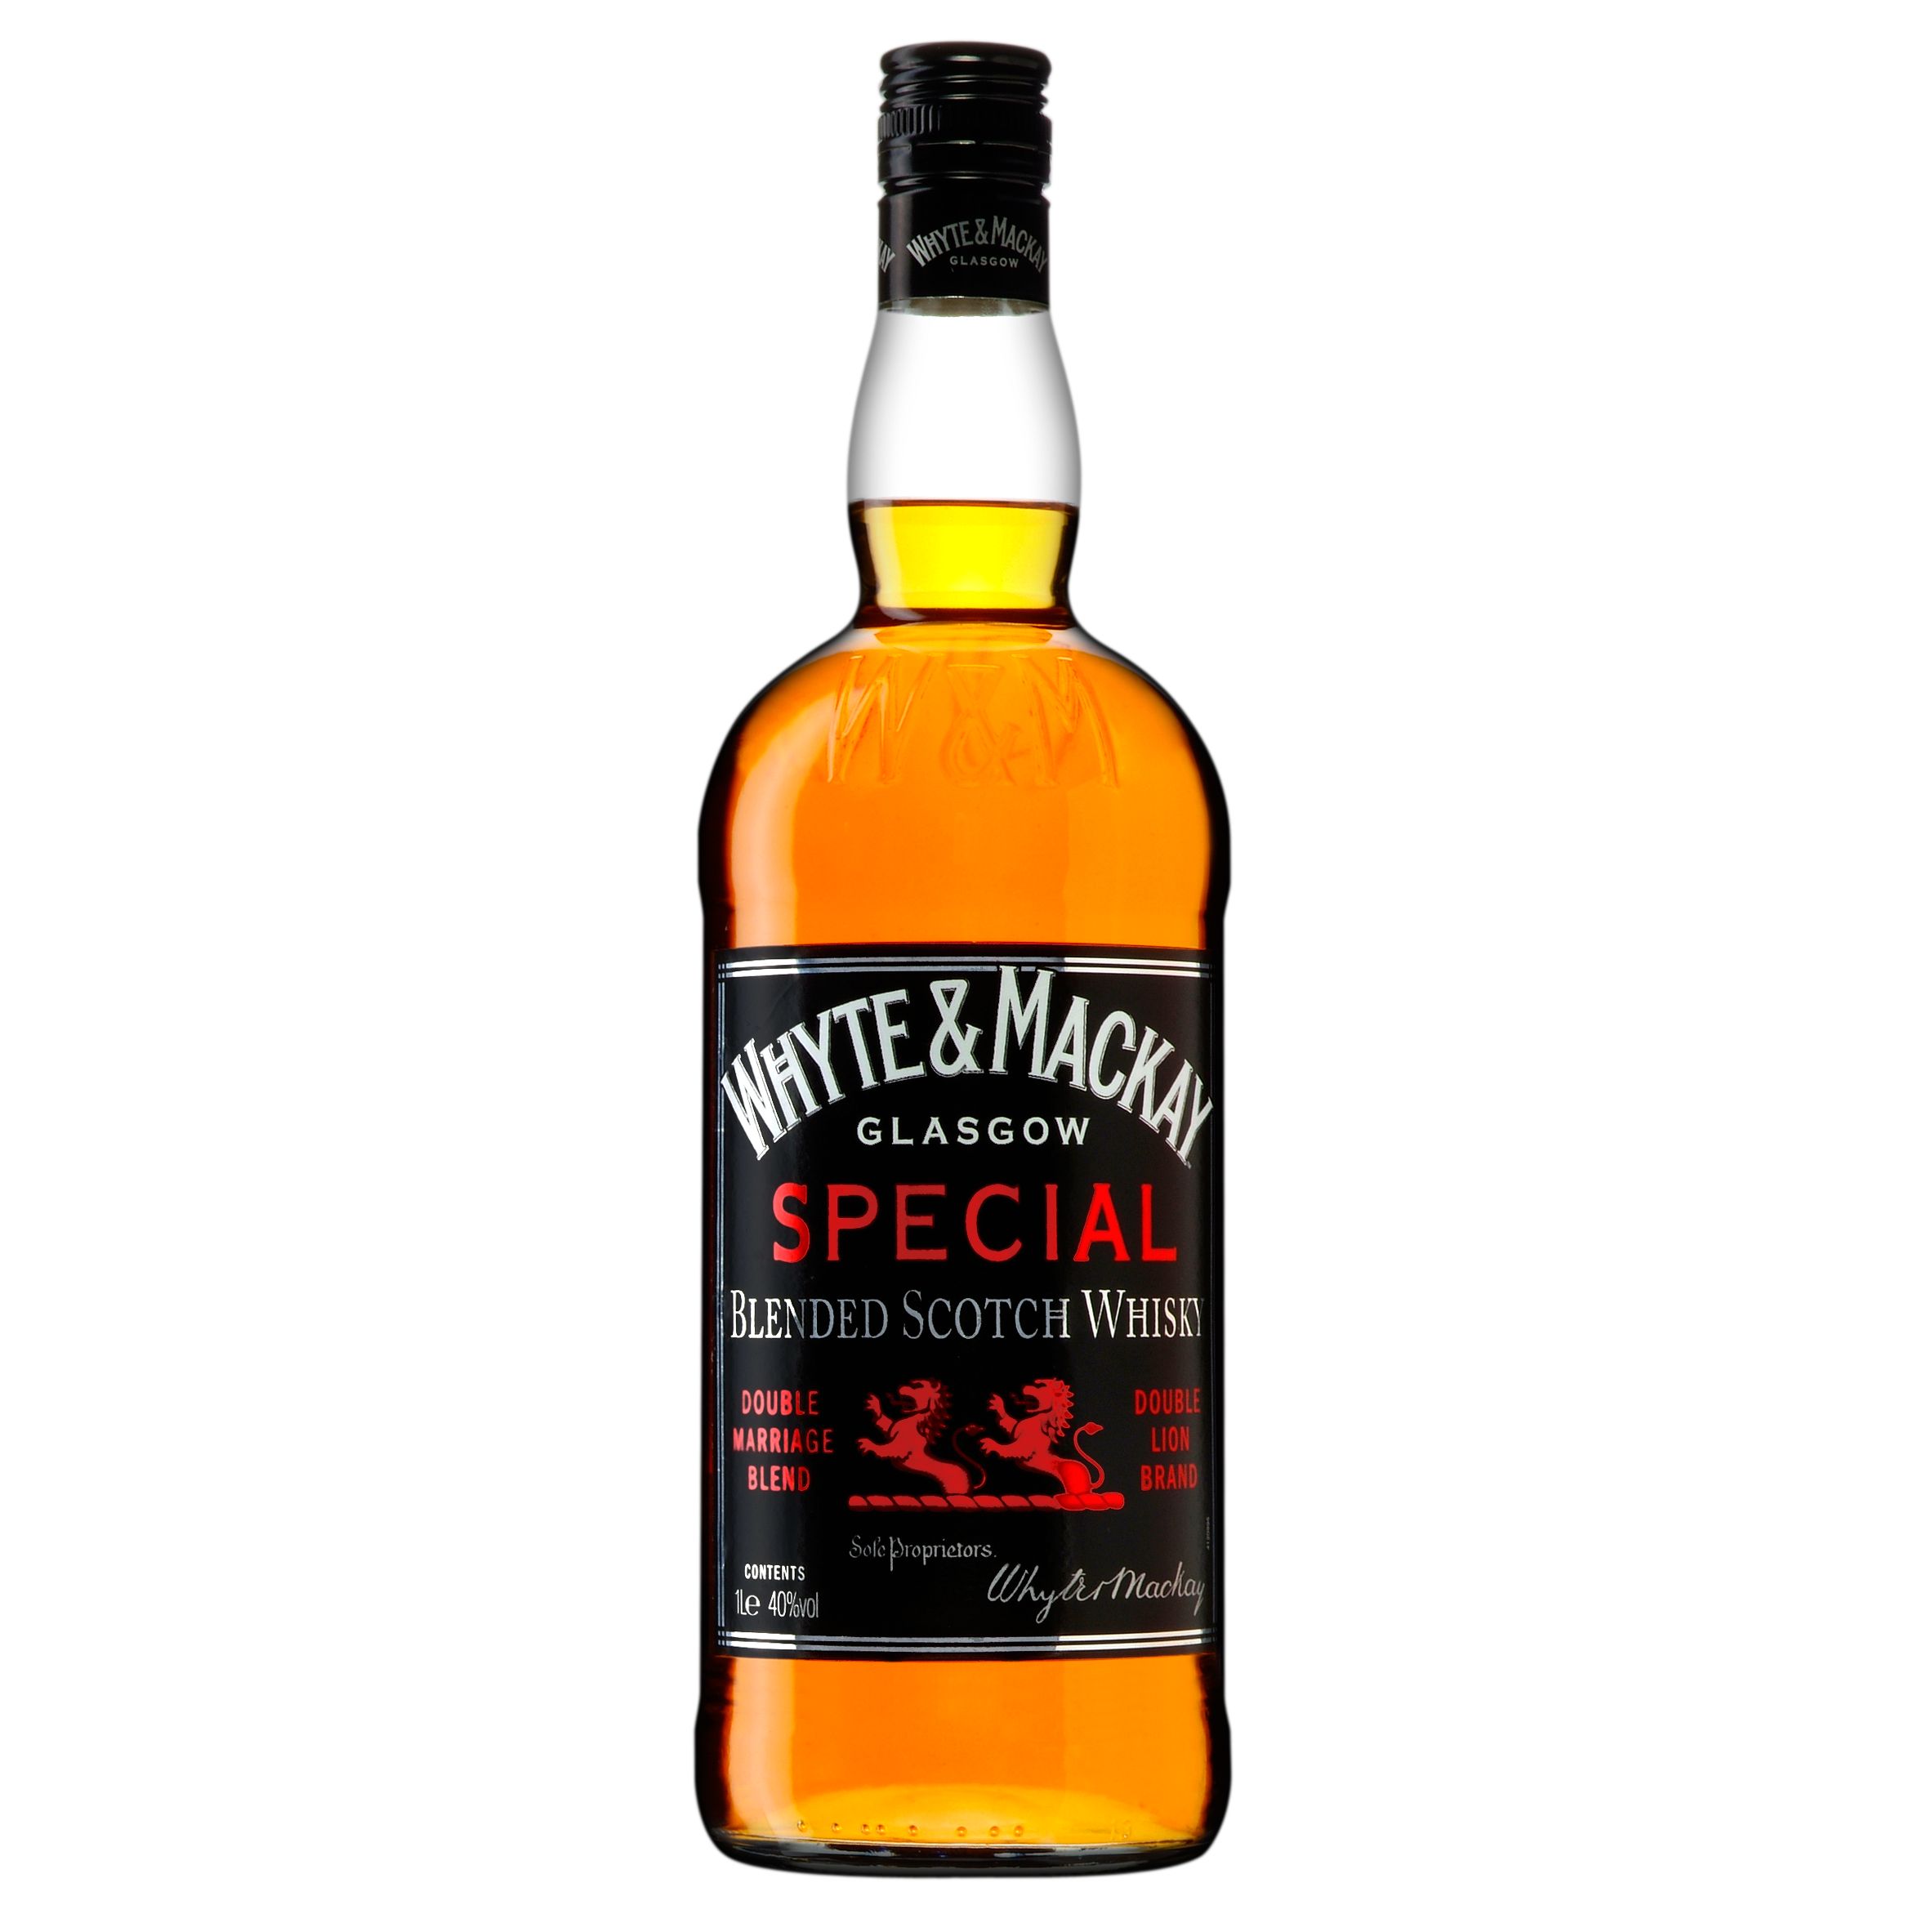 Whyte & Mackay Special Blended Scotch Whisky, 1 Litre at John Lewis